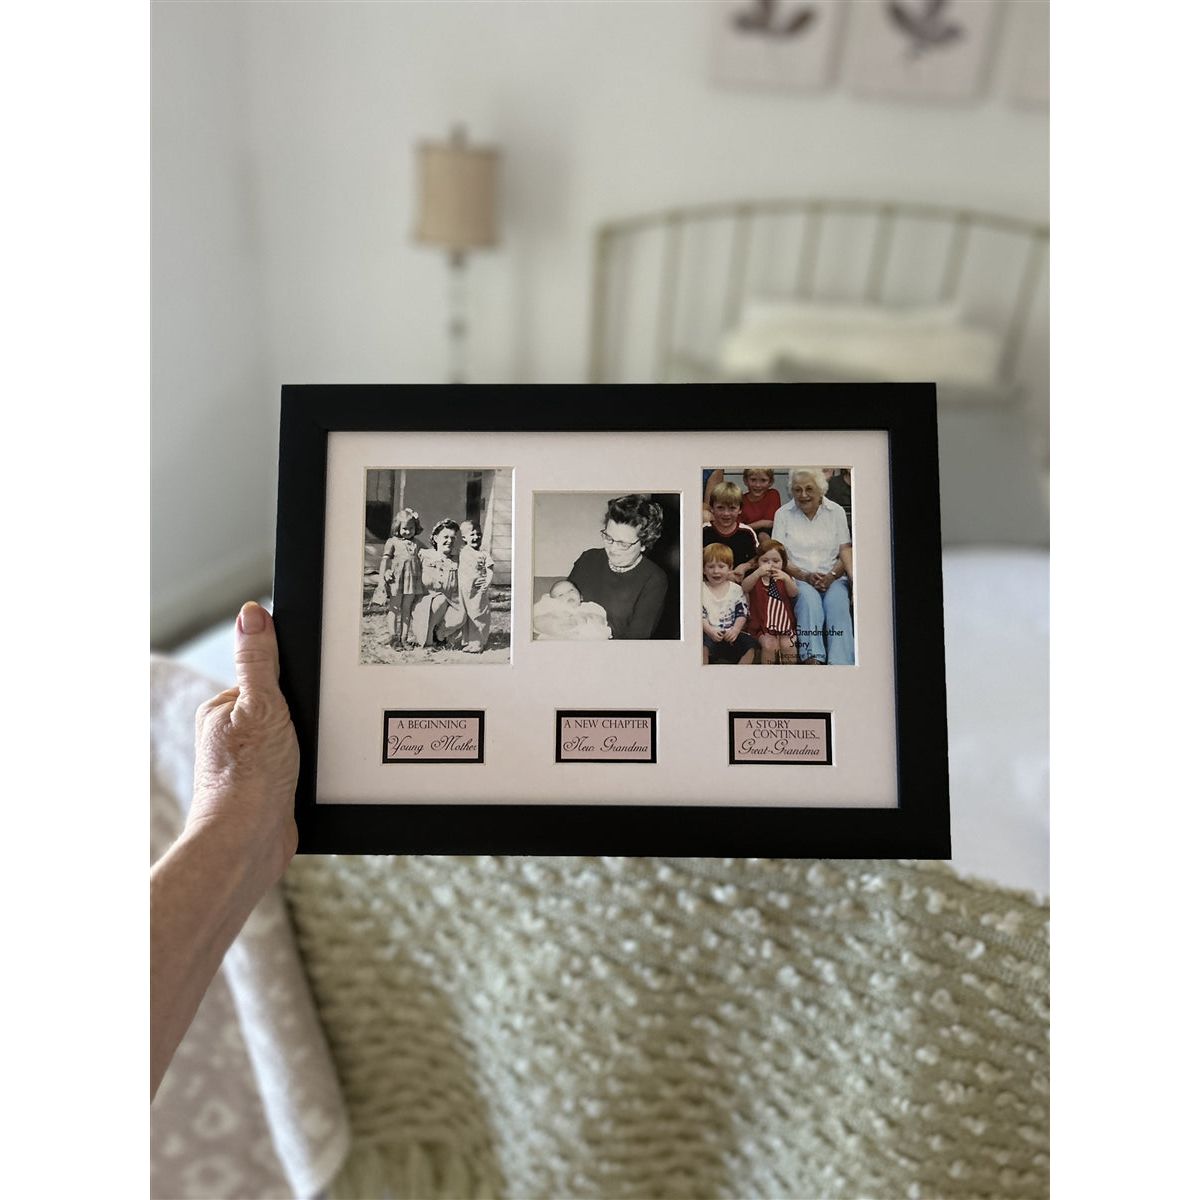 Great Grandma Life Story frame being held in a hand.